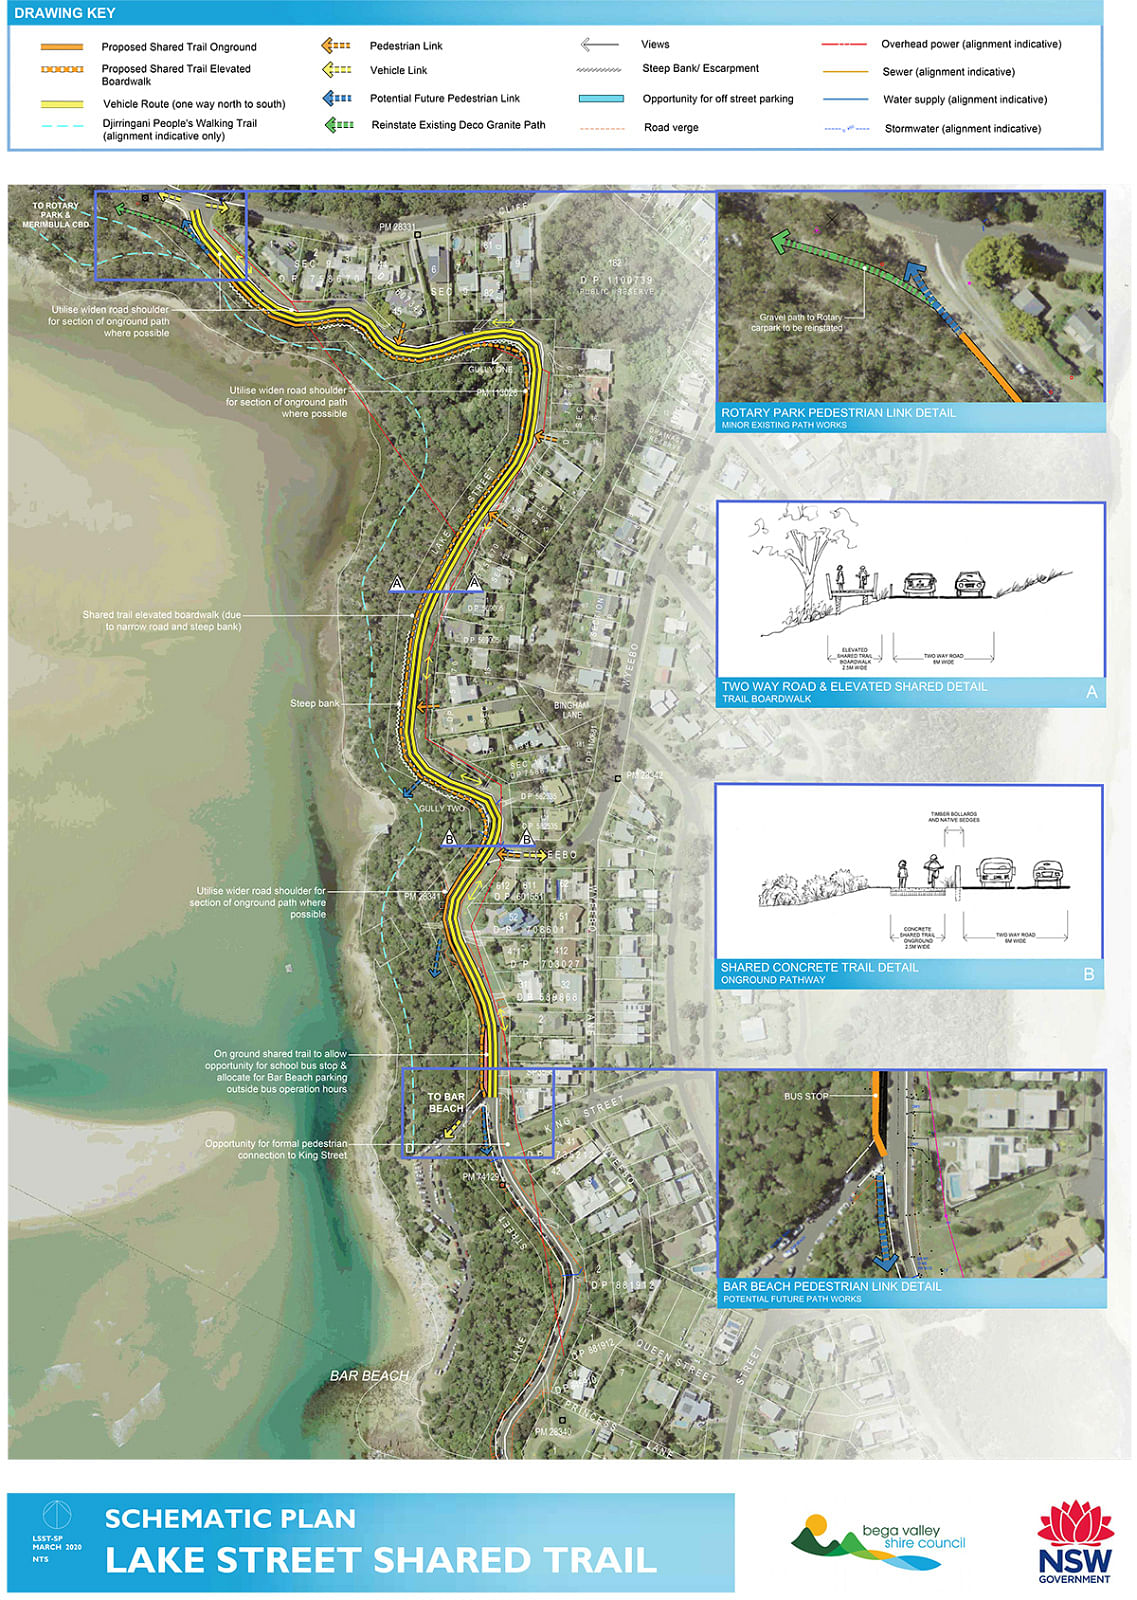 Image with link to PDF document showing a map of the the proposed shared trail.